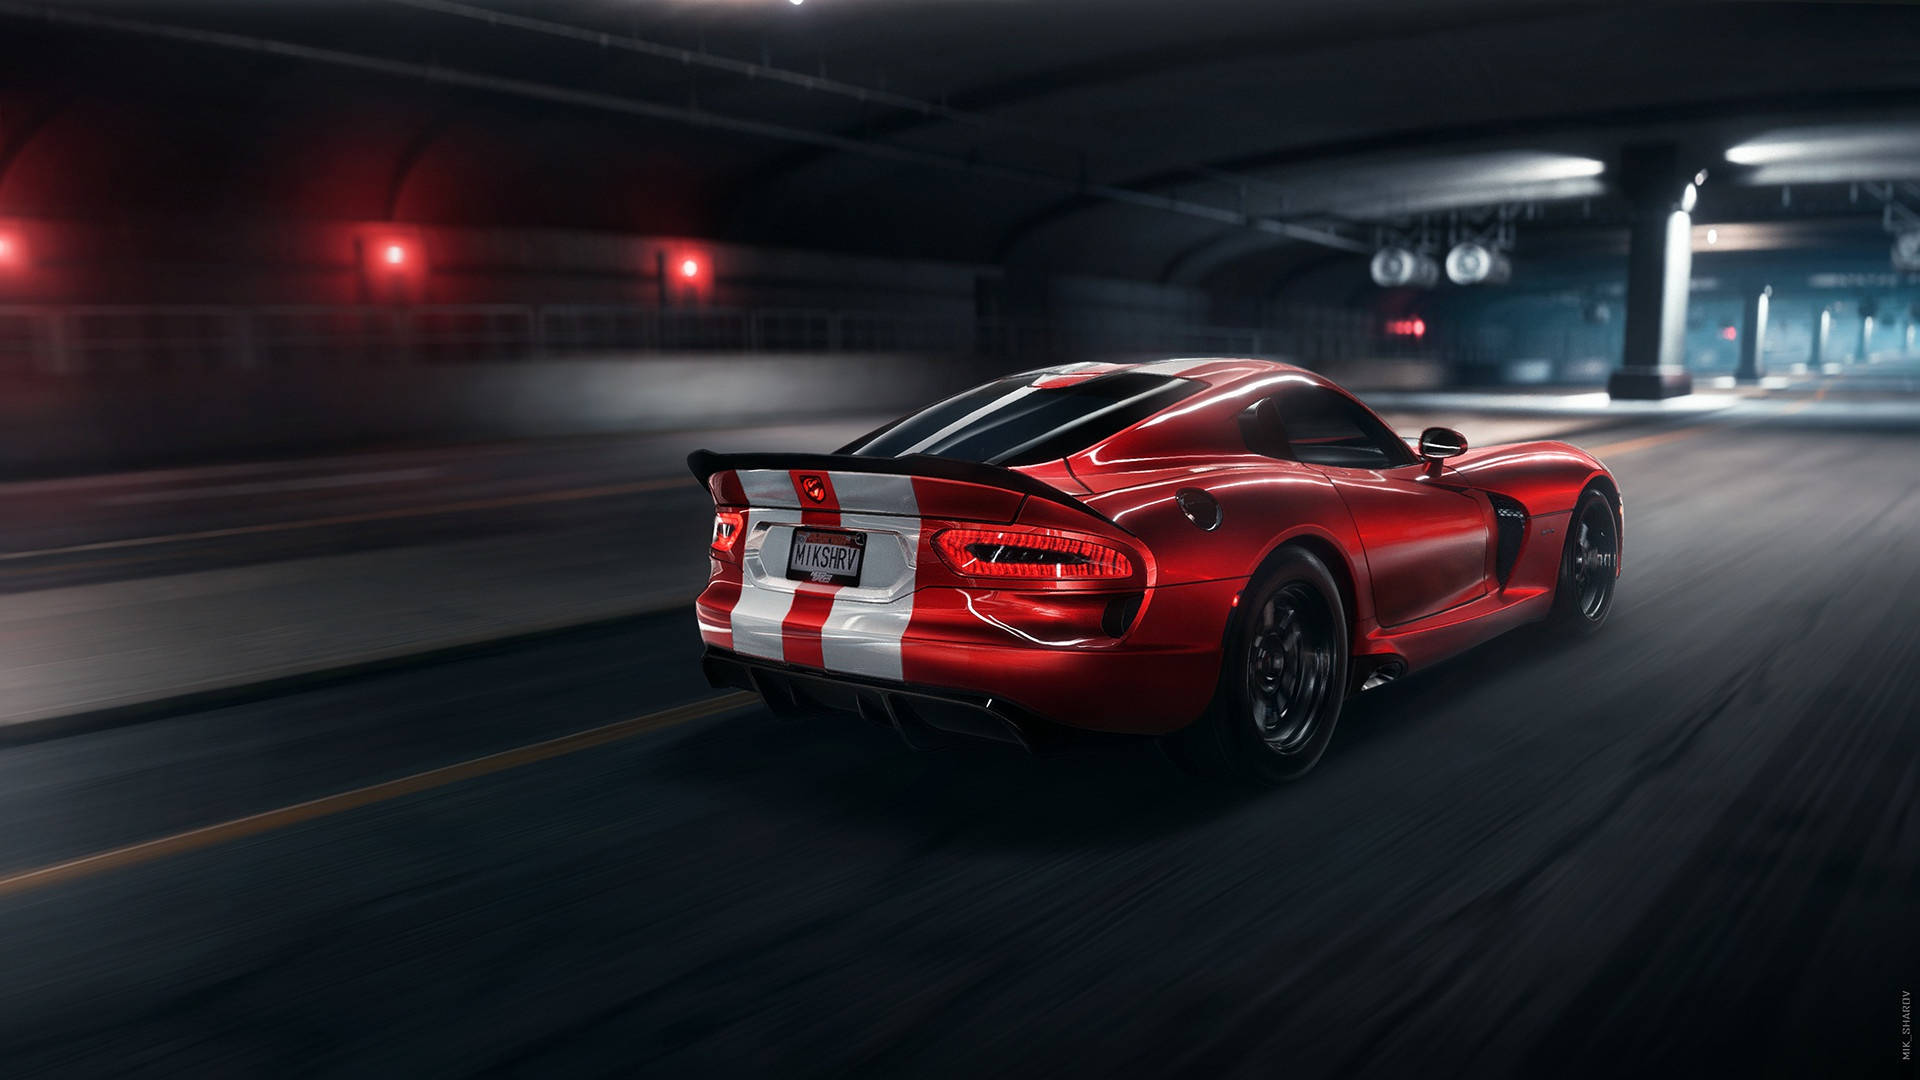 Need For Speed Payback Dodge Viper Srt